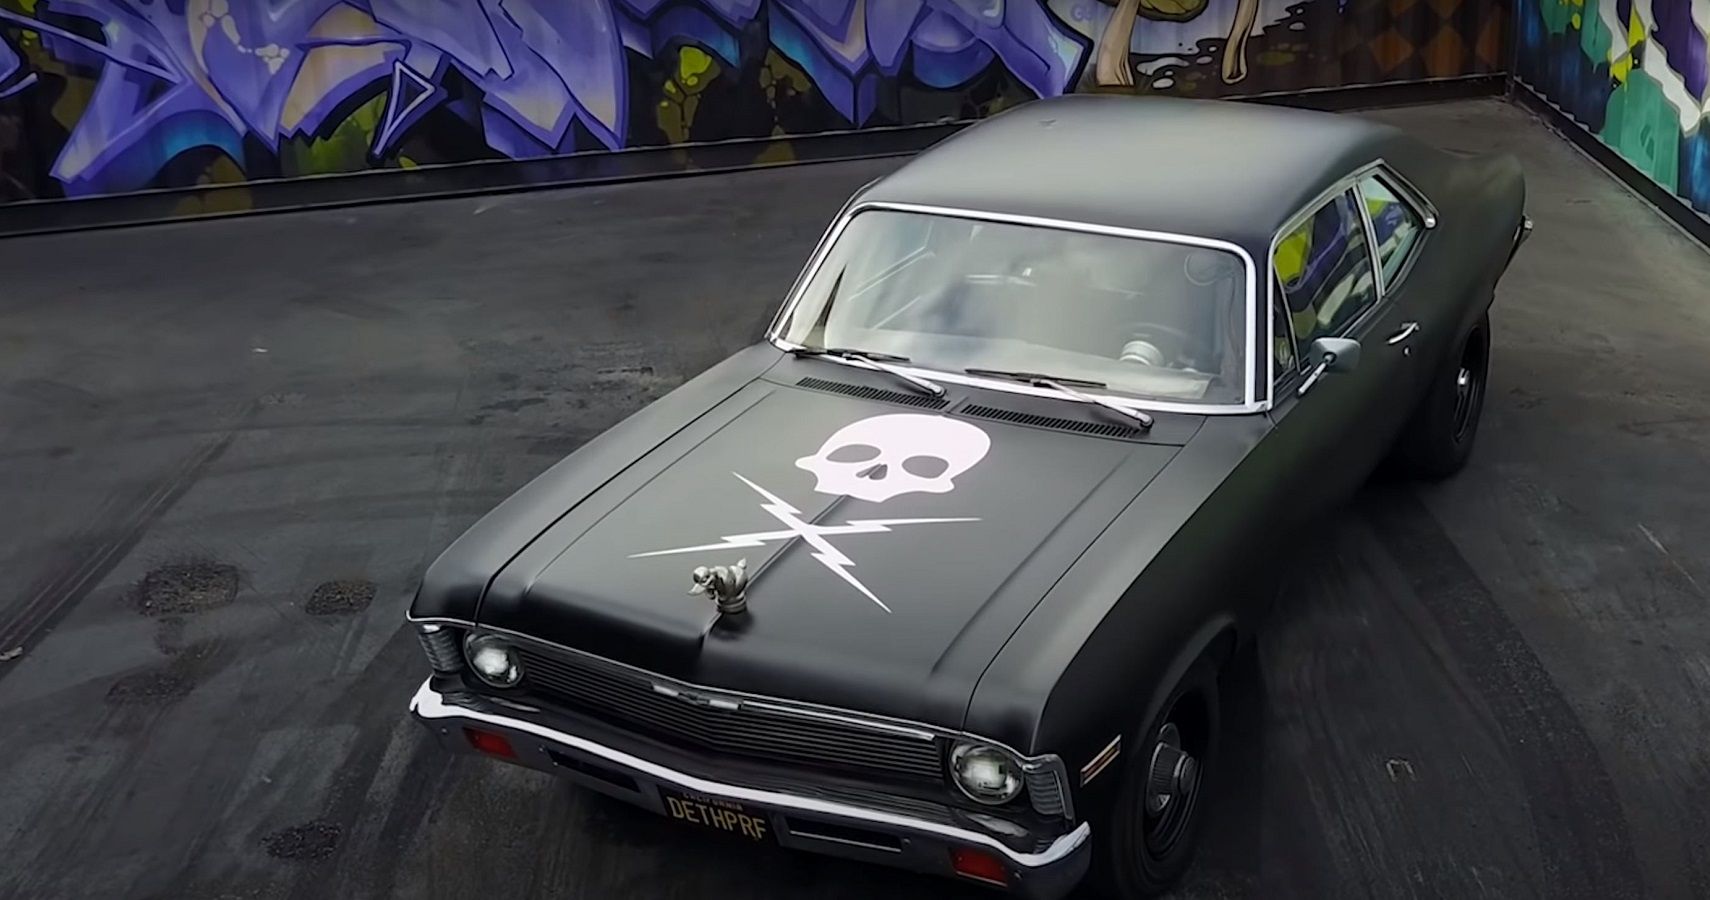 Here's Where The Chevy Nova From Death Proof Is Today